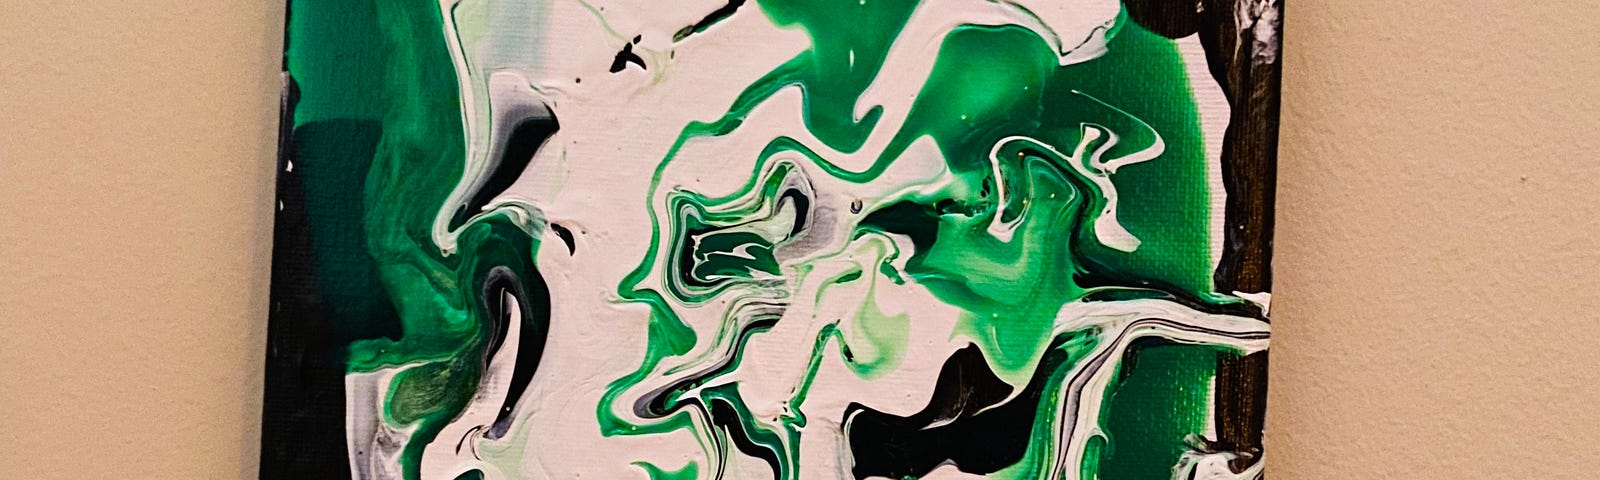 Photo of an abstract art swirly pourover painting created by the author, in black, white, gray, and green which happen to be the colors of the demiromantic flag